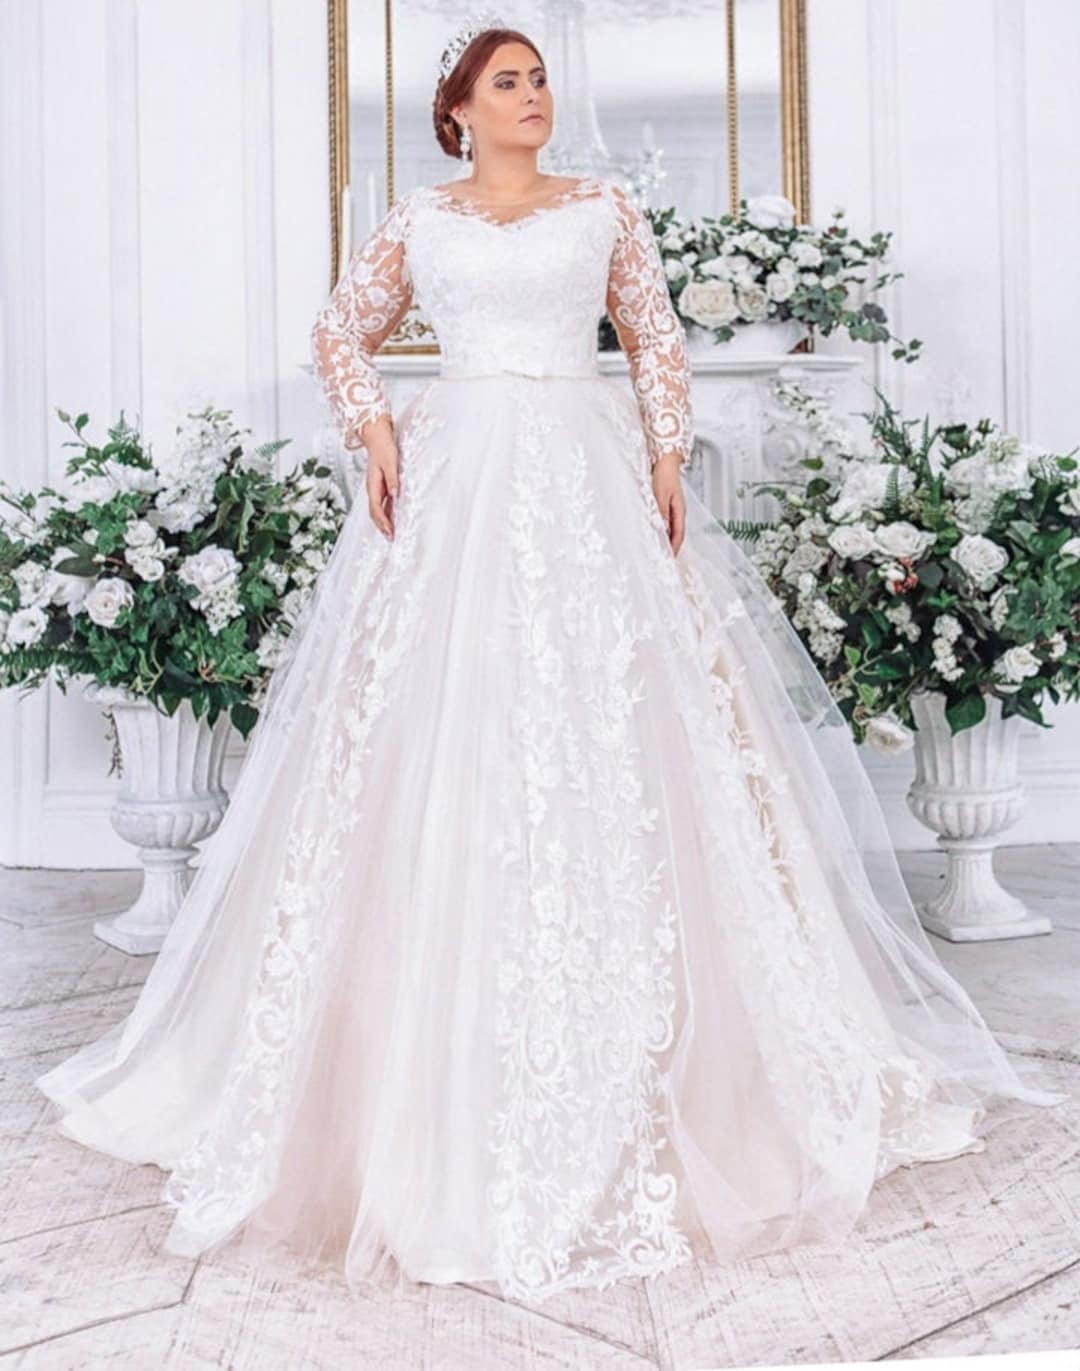 Plus Size Wedding Dress, Lace and Tulle Wedding Dress Long Sleeve, Plus  Size Brautkleid, Size Plus Wedding Dress, Plus Size Bride Dress 